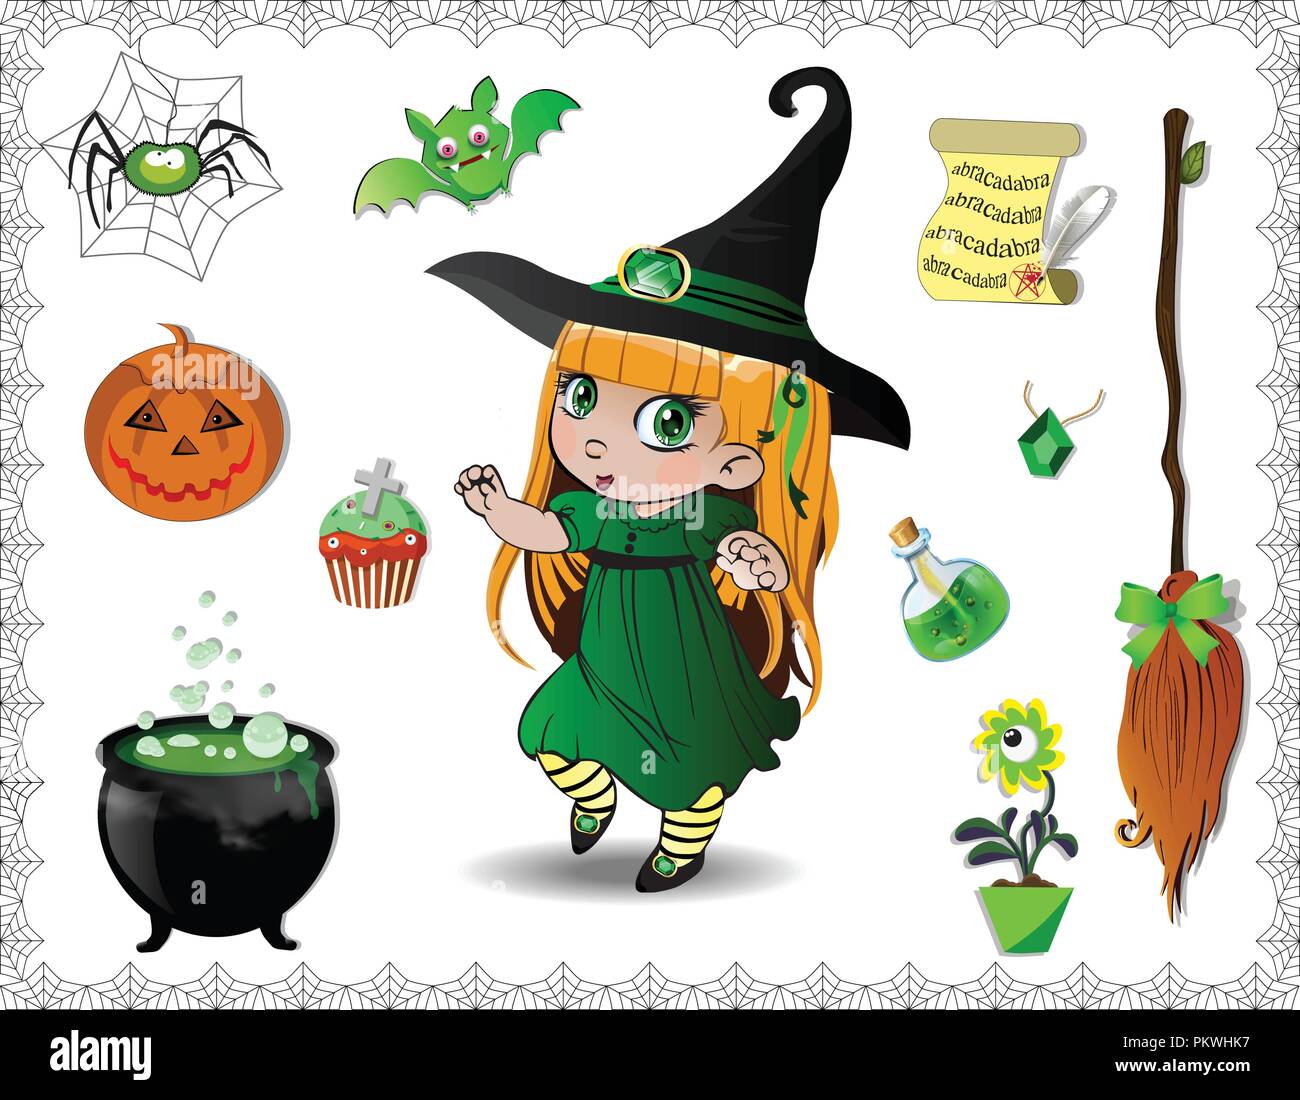 https://c8.alamy.com/comp/PKWHK7/green-halloween-cartoon-set-of-various-objects-for-witches-and-cute-little-witch-girl-in-costume-and-hat-isolated-on-white-background-vector-icons-c-PKWHK7.jpg